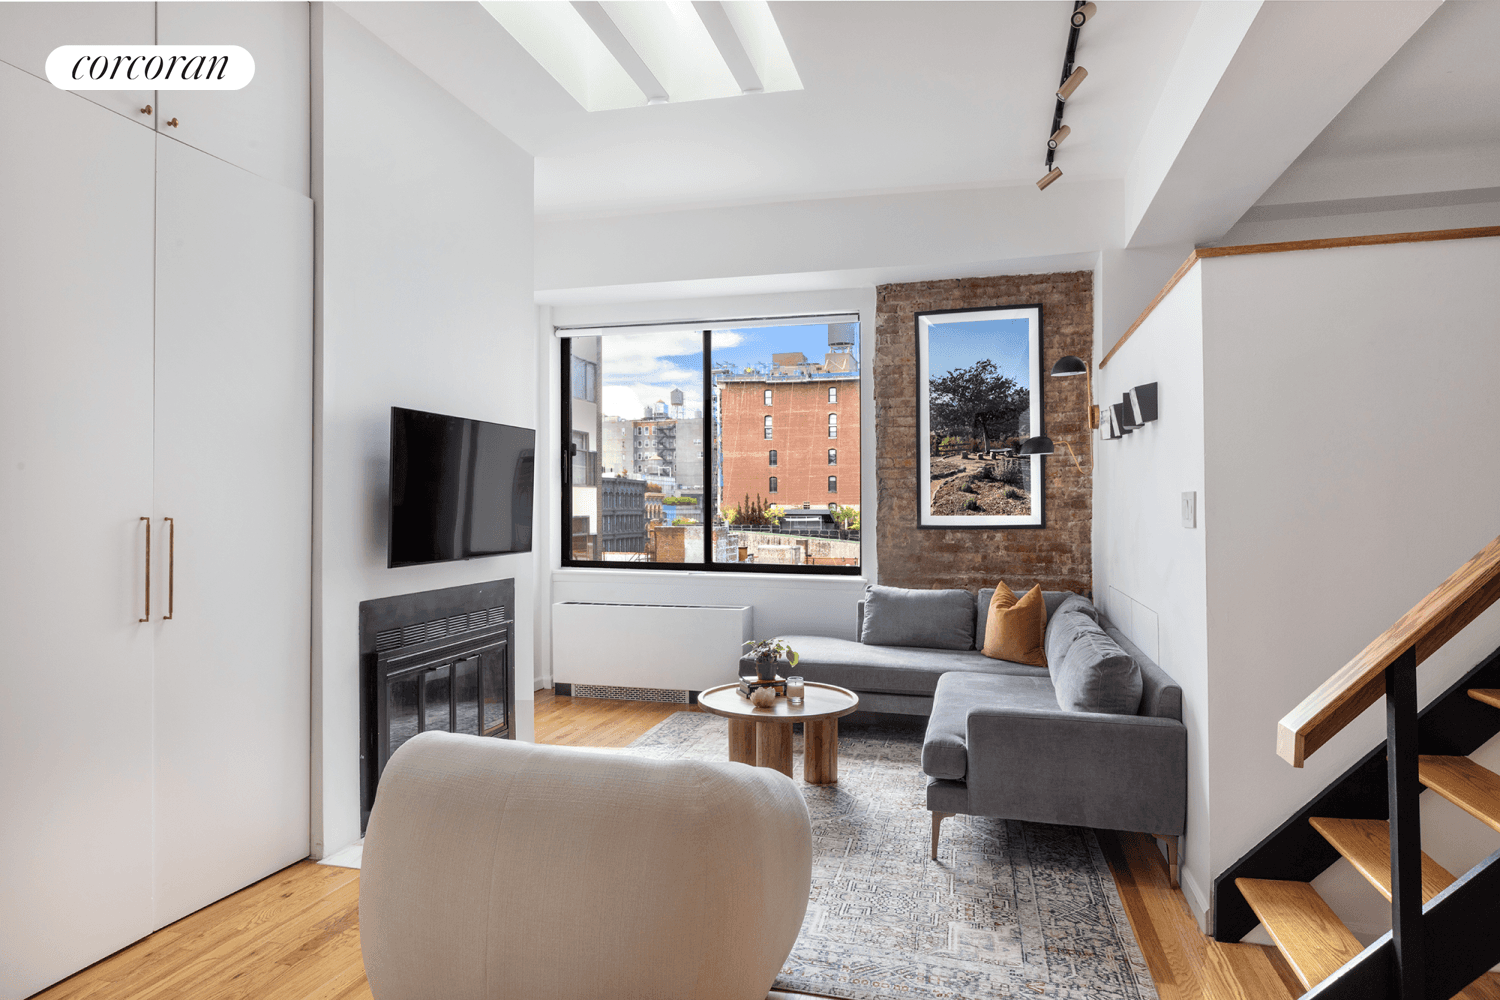 Discover the perfect blend of loft living and tranquility in this newly renovated 1 bedroom nestled at the intersection of NoHo and Greenwich Village.